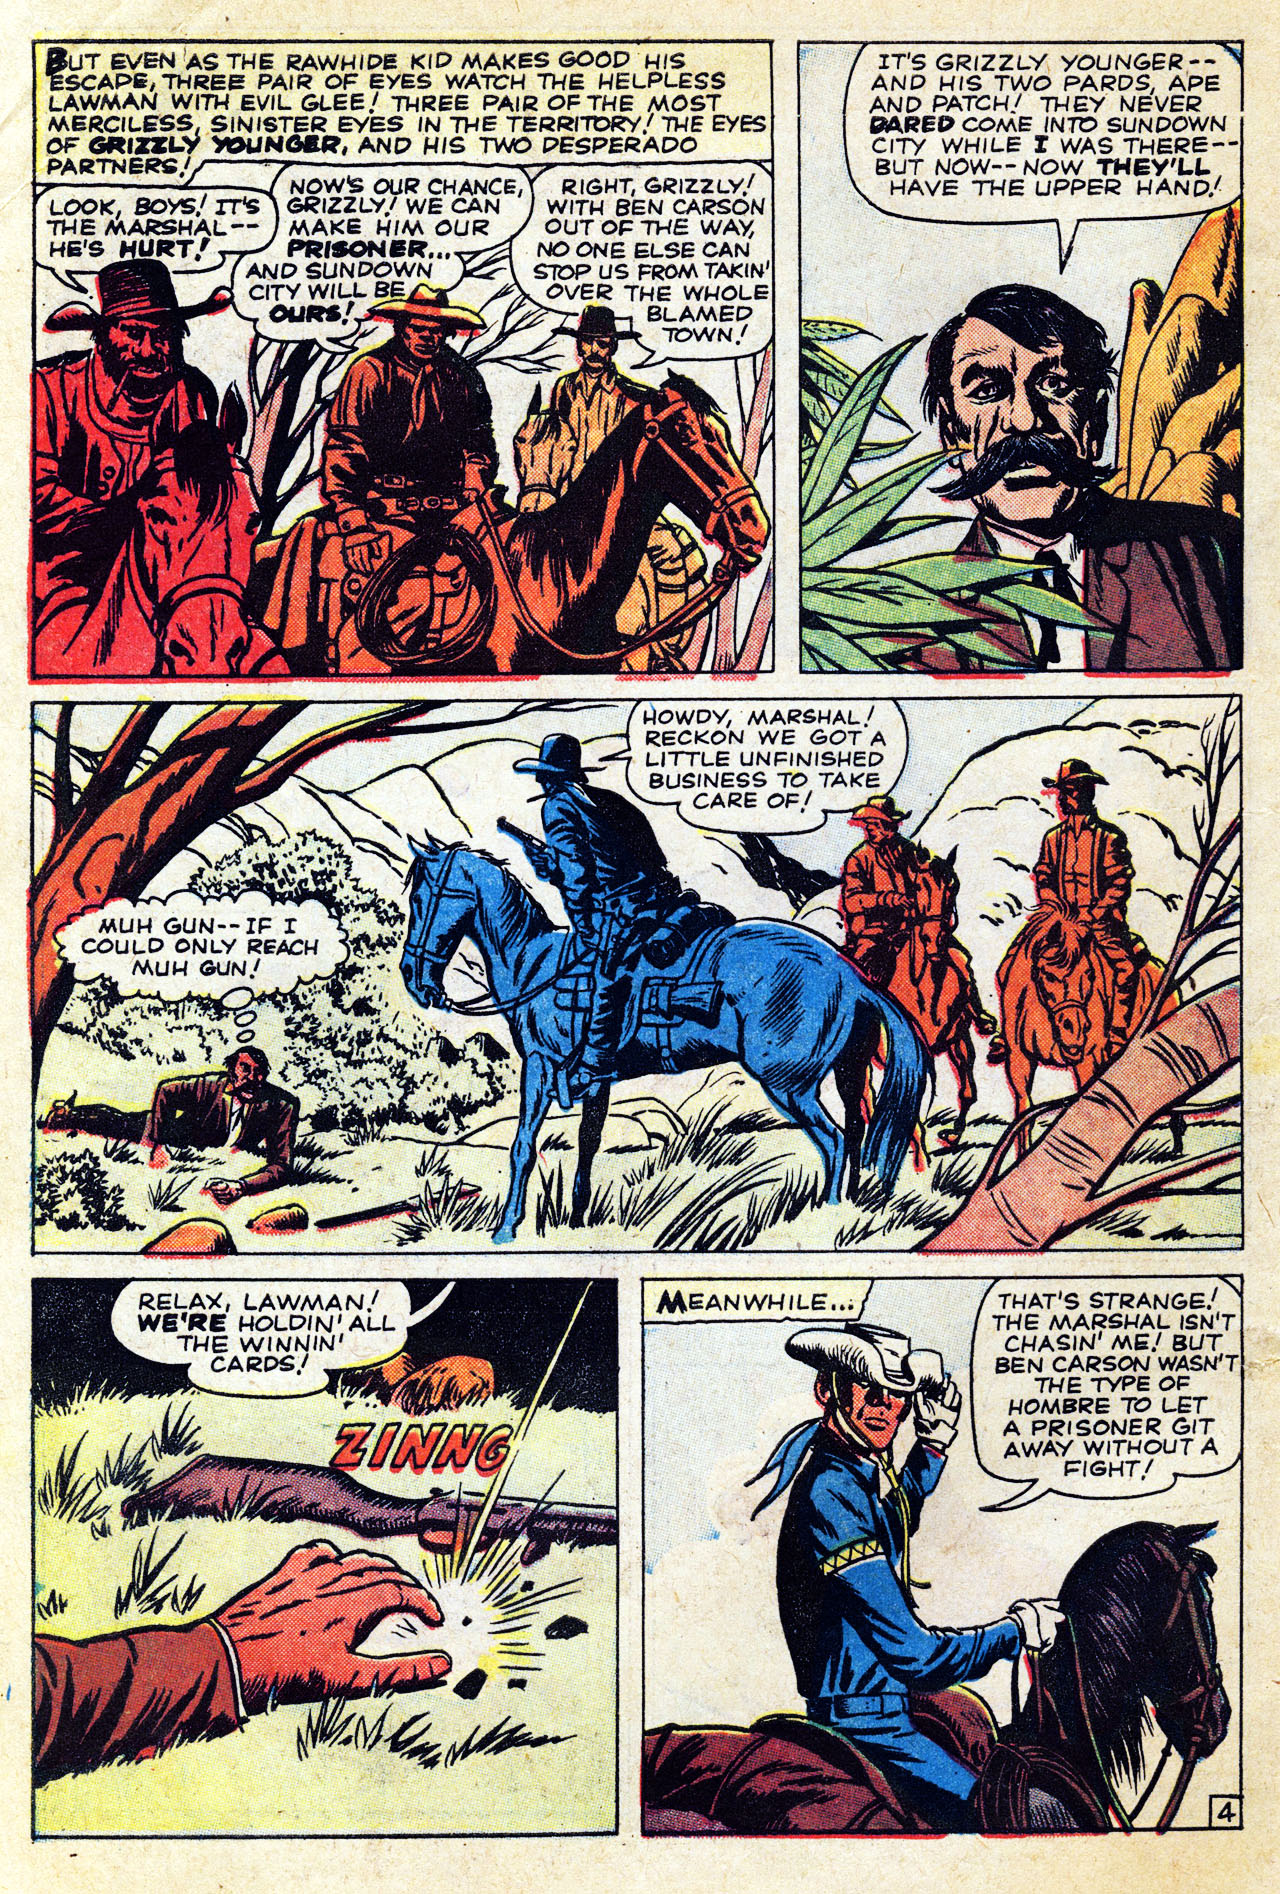 Read online The Rawhide Kid comic -  Issue #21 - 6